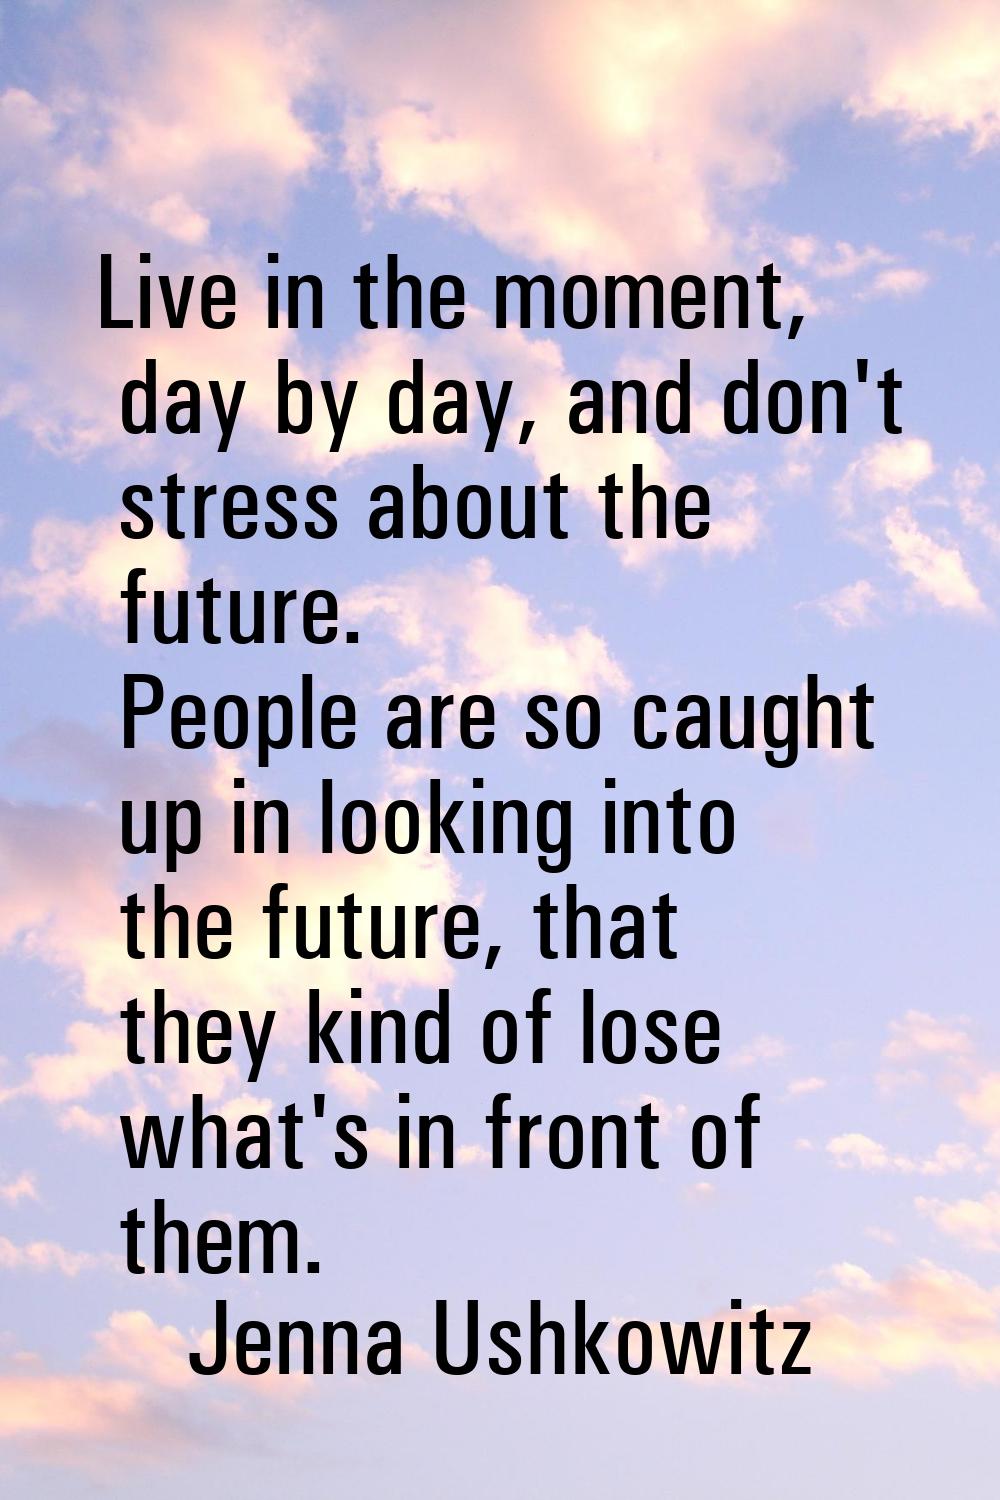 Live in the moment, day by day, and don't stress about the future. People are so caught up in looki